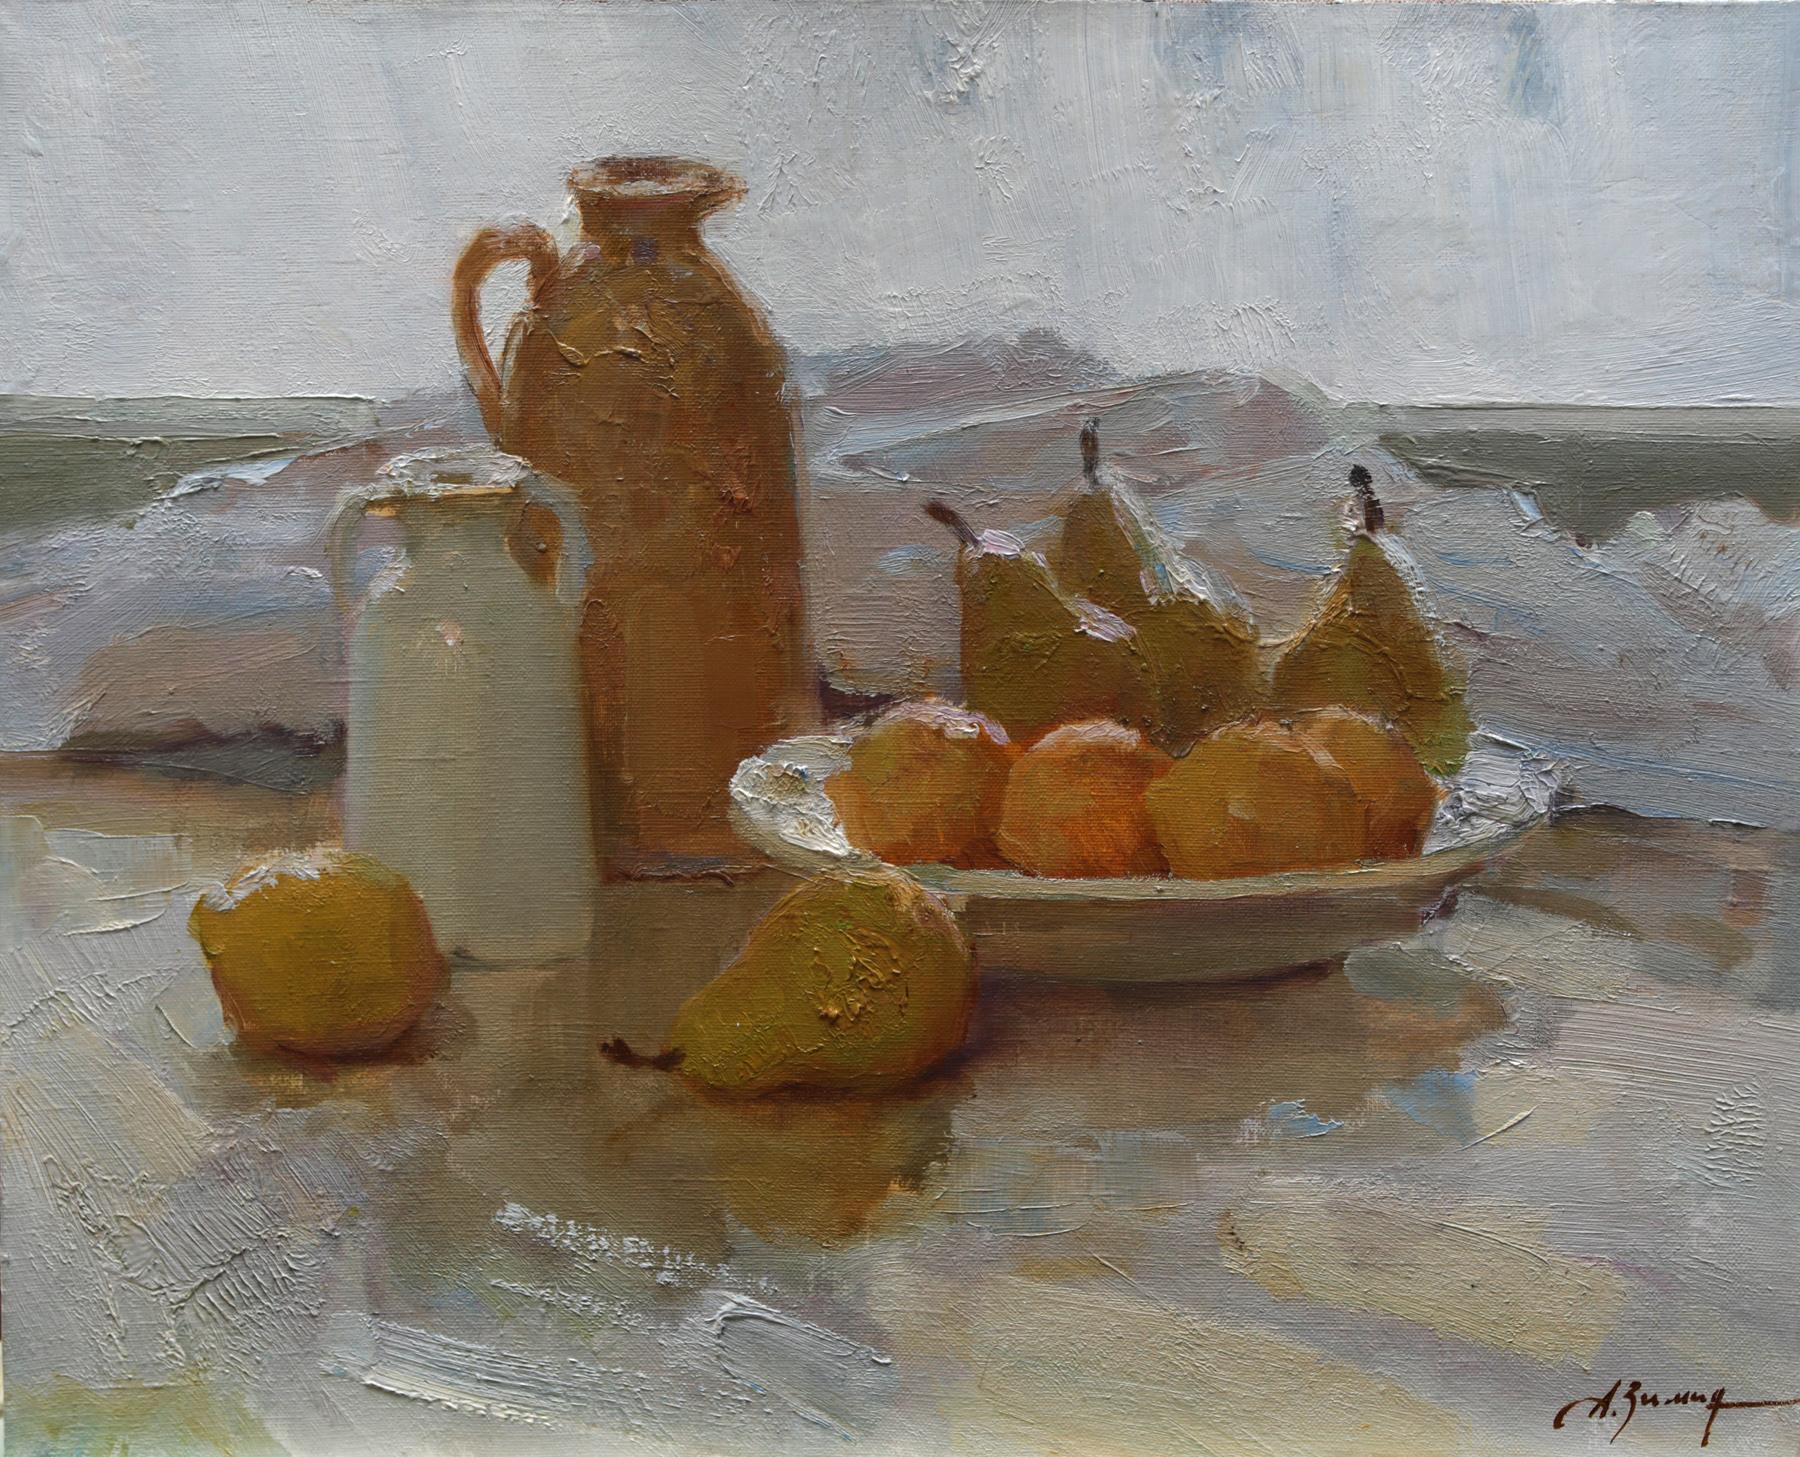 Fruits on the table